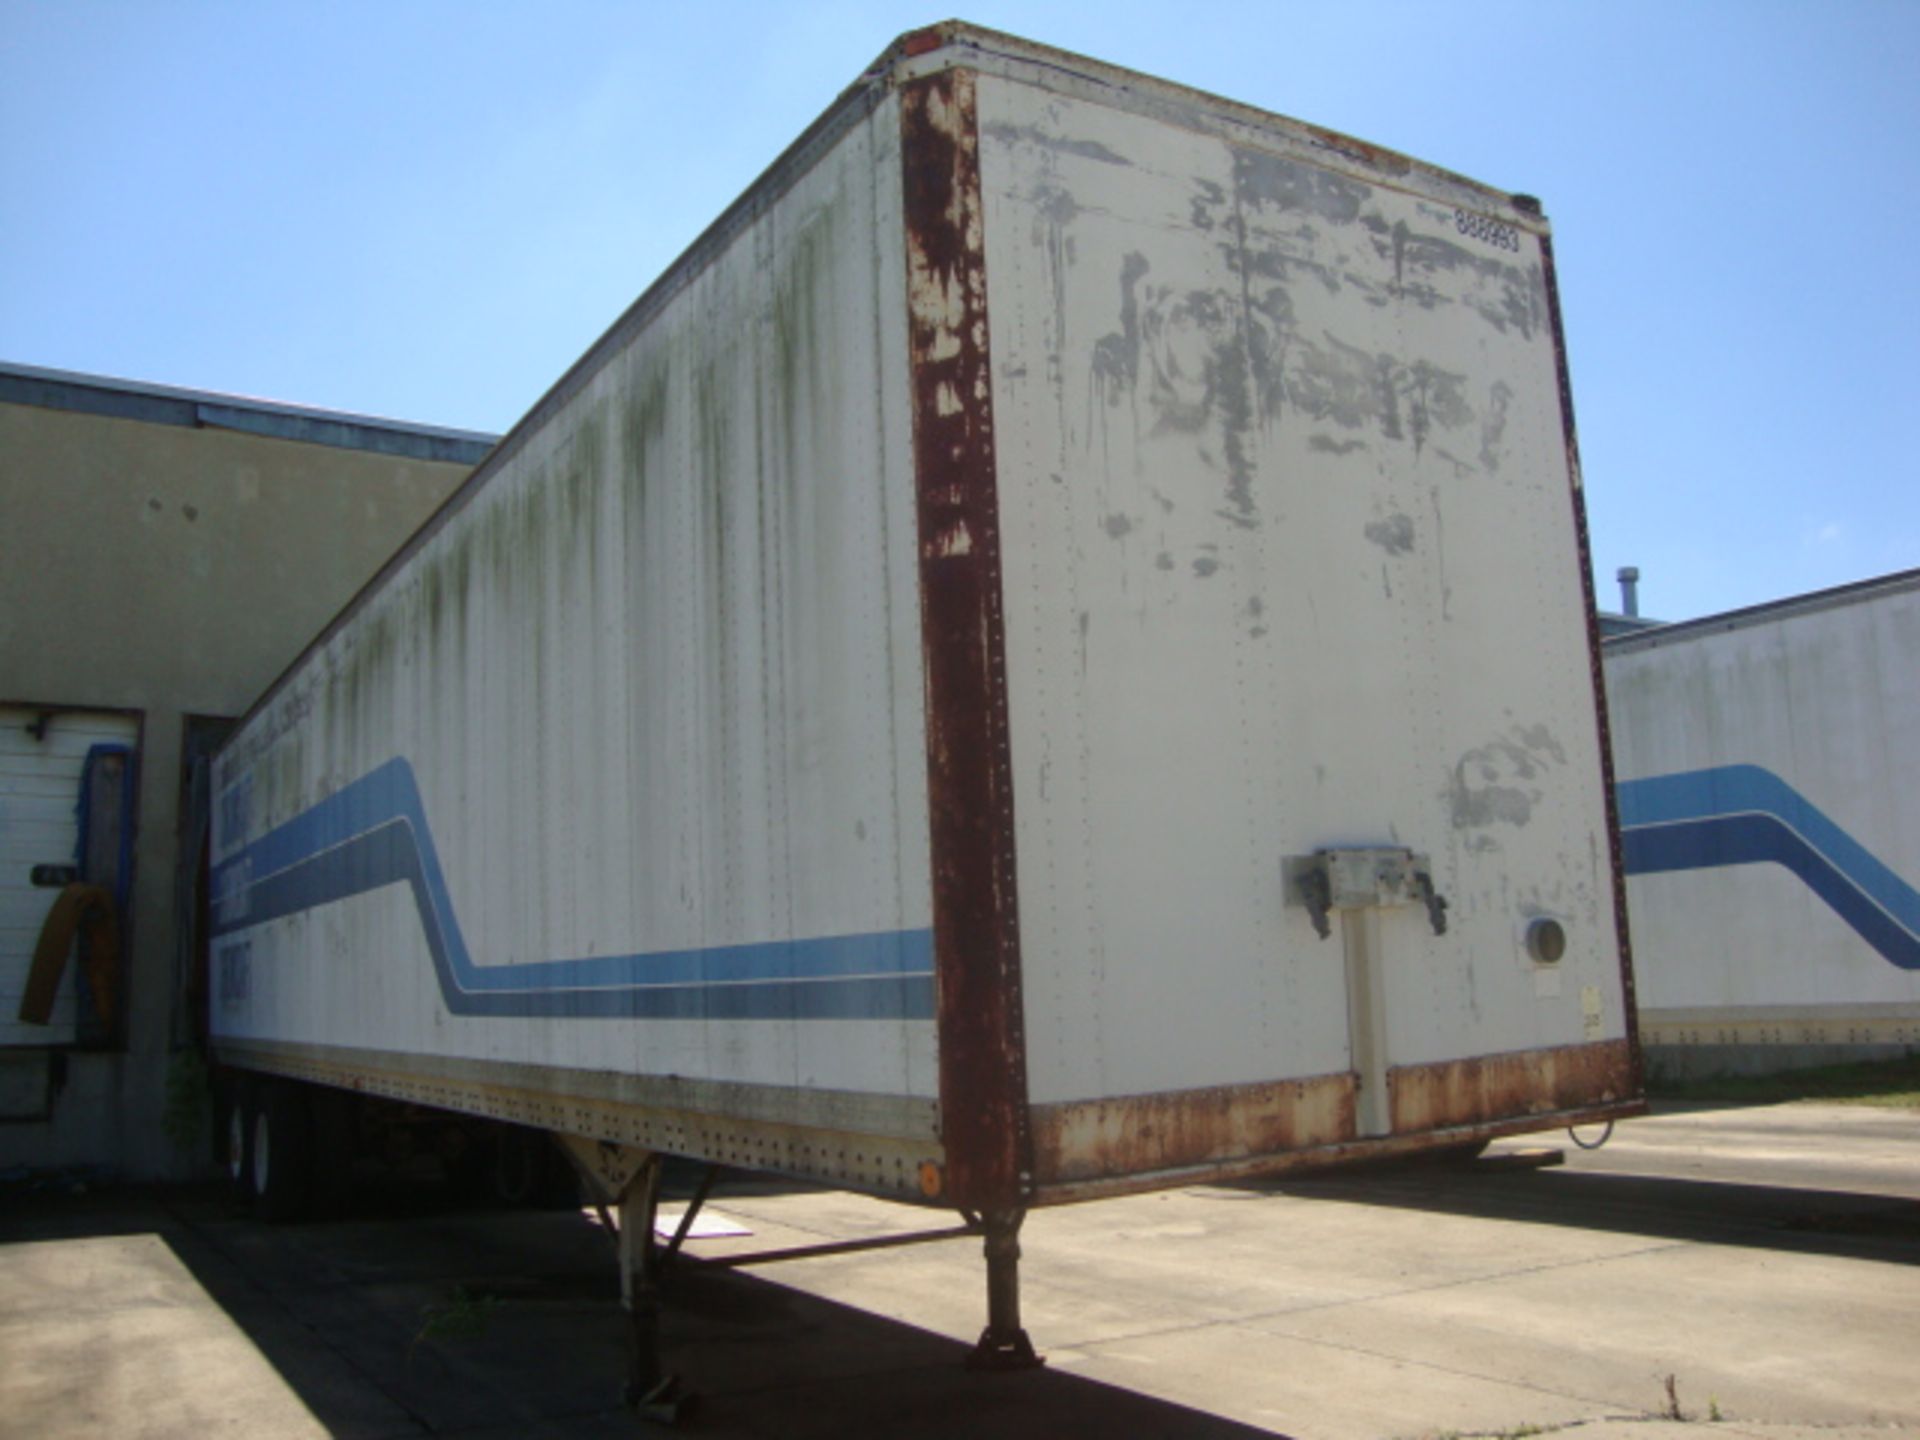 BOX TRAILER, STRICK 42', tandem axle, Trailer I.D. No. 888993 (no title - yard use only) - Image 2 of 2